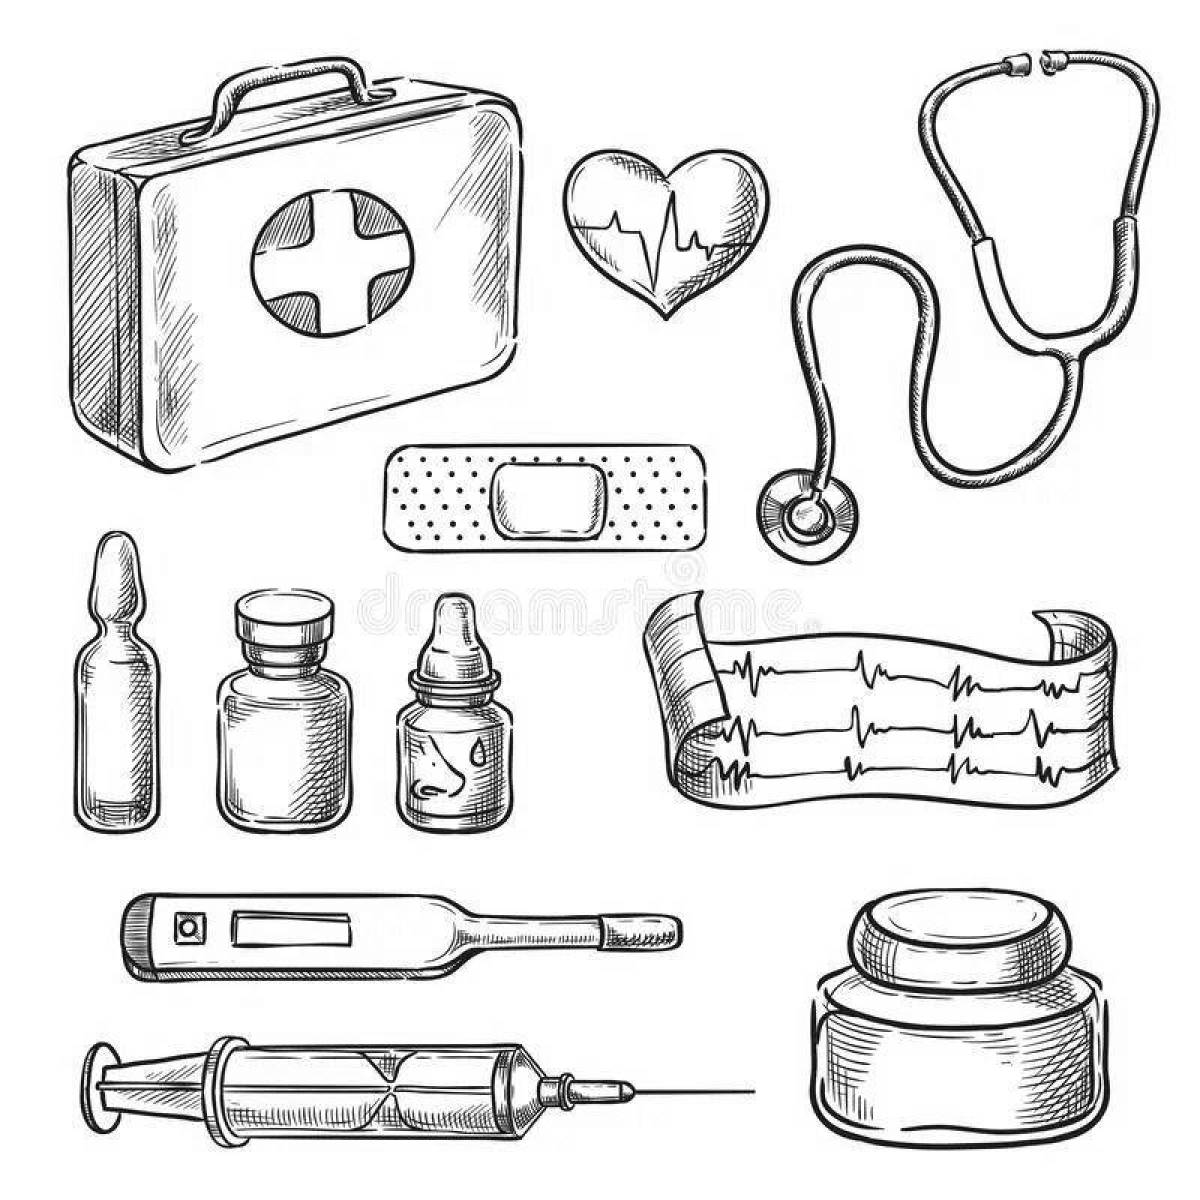 First aid kit coloring page